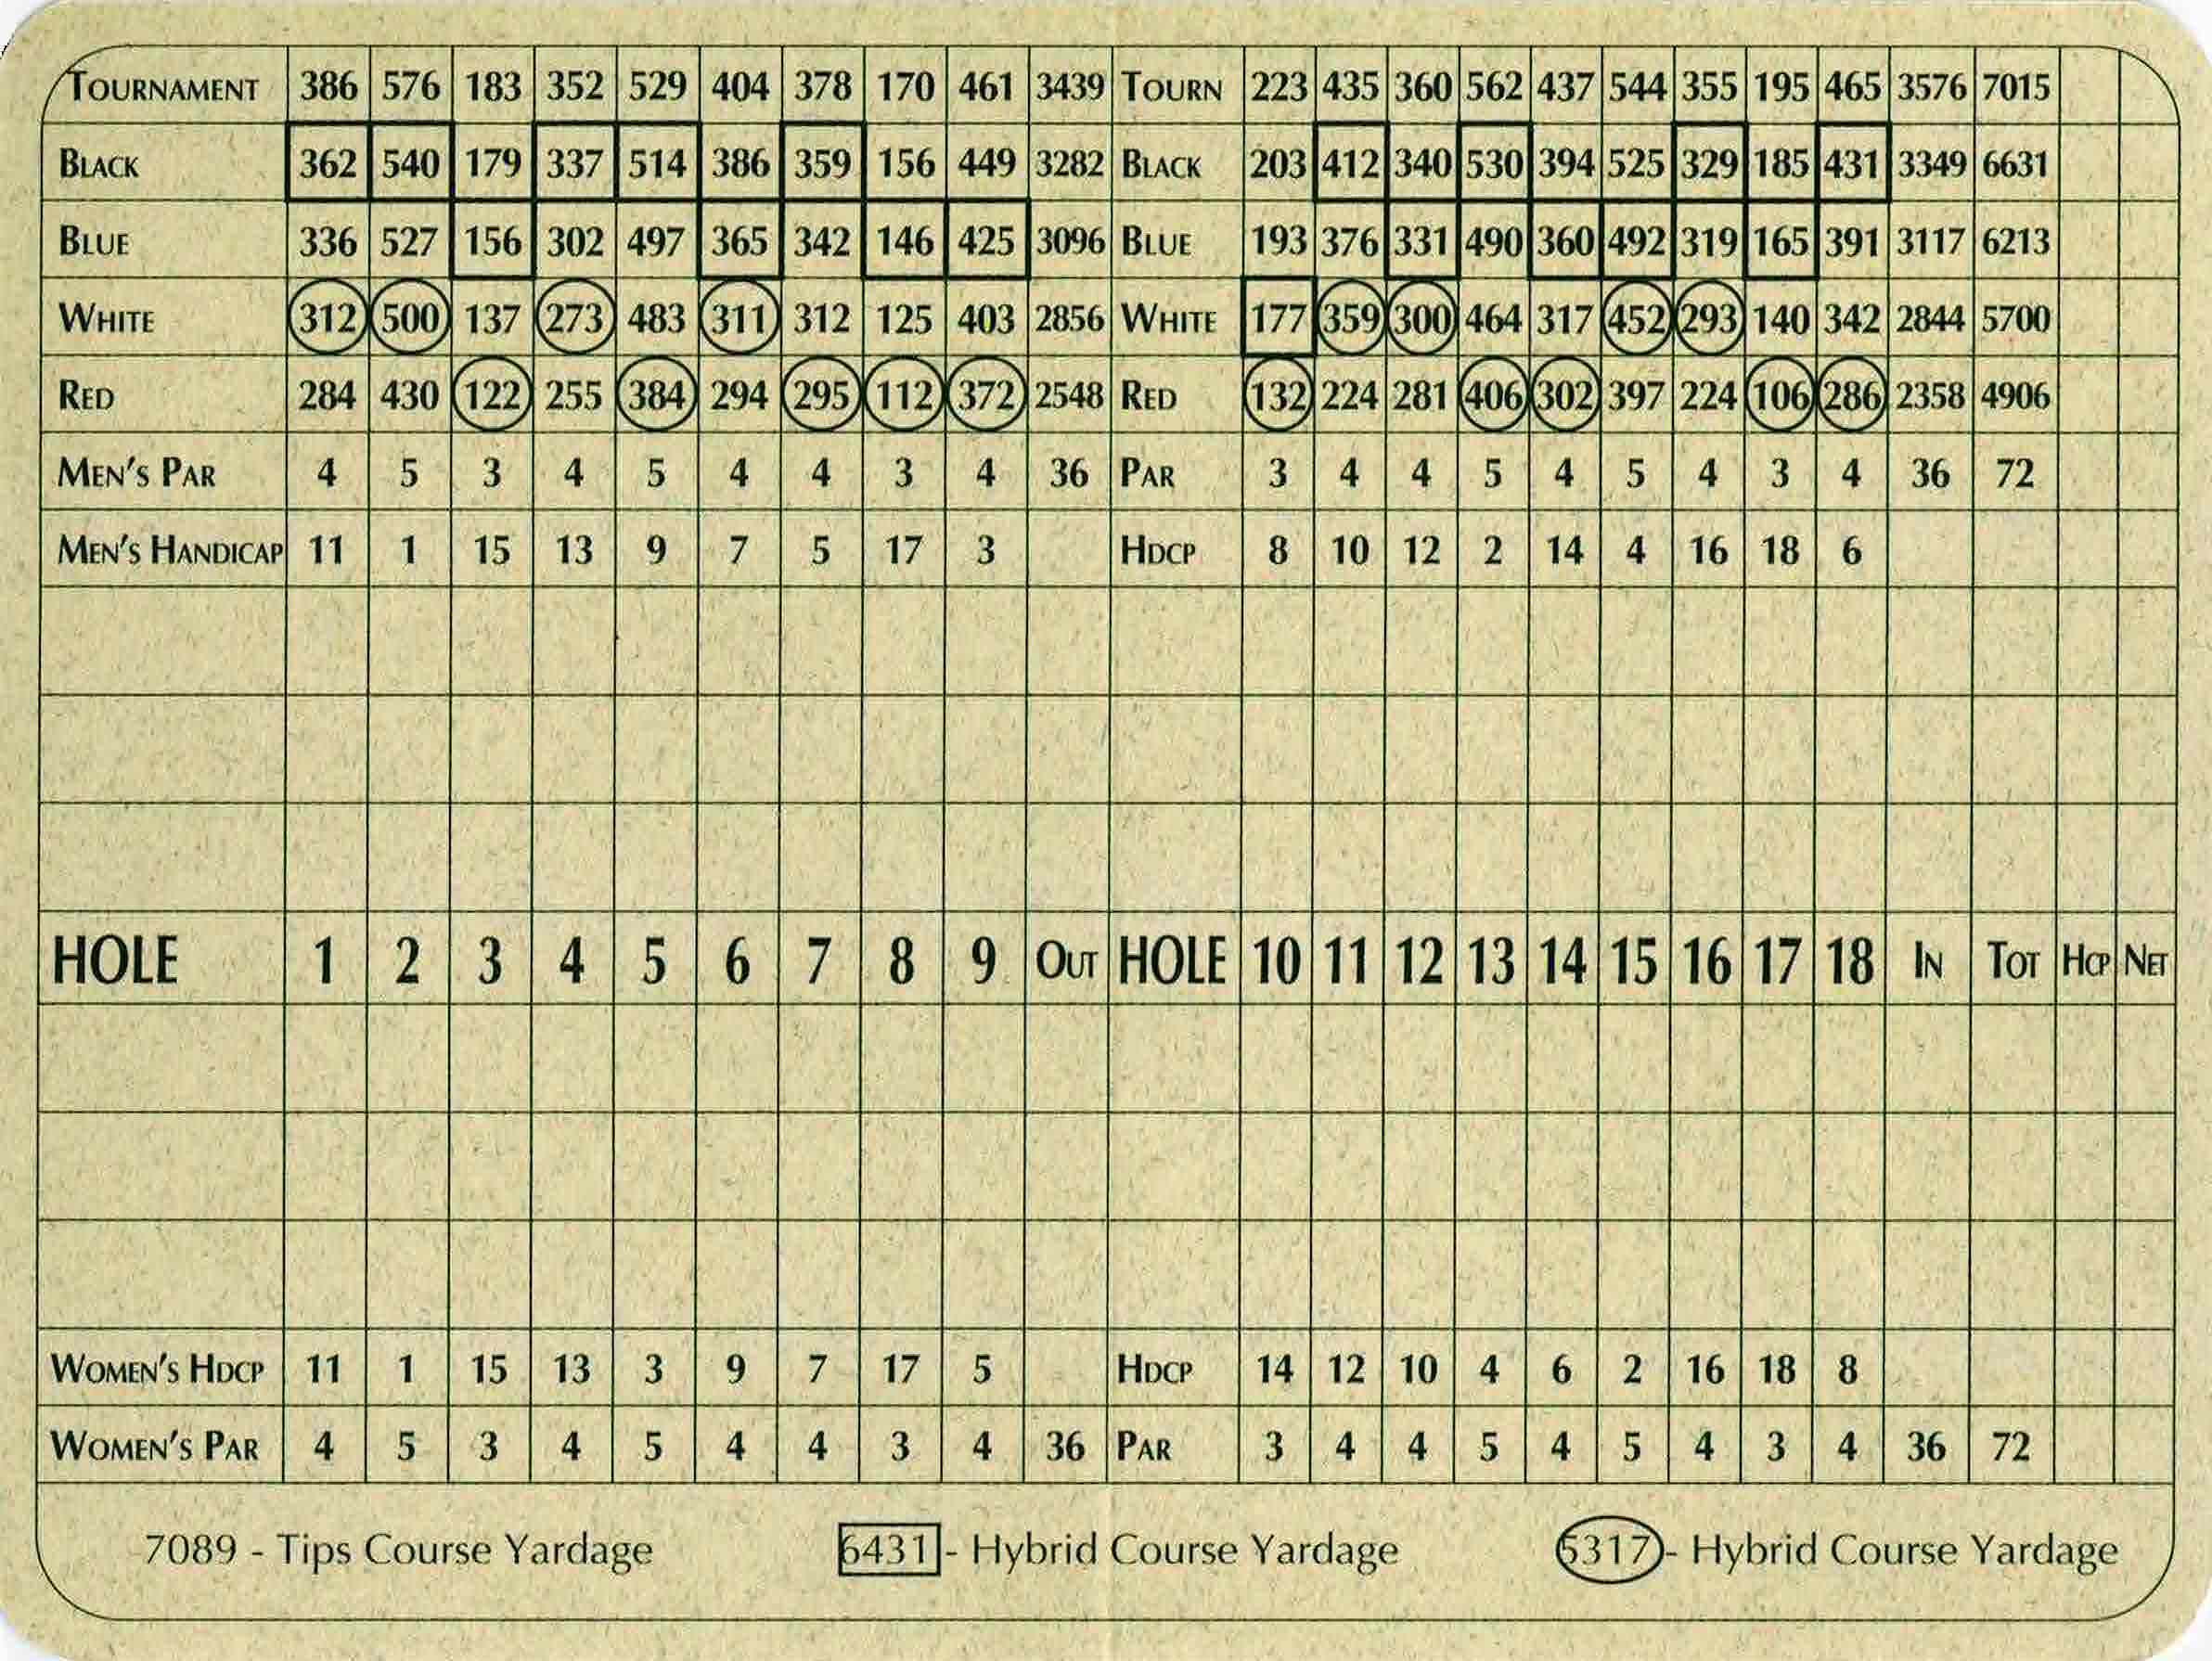 Scan of the scorecard from The Preserve at Oak Meadows in Addison, Illinois. 